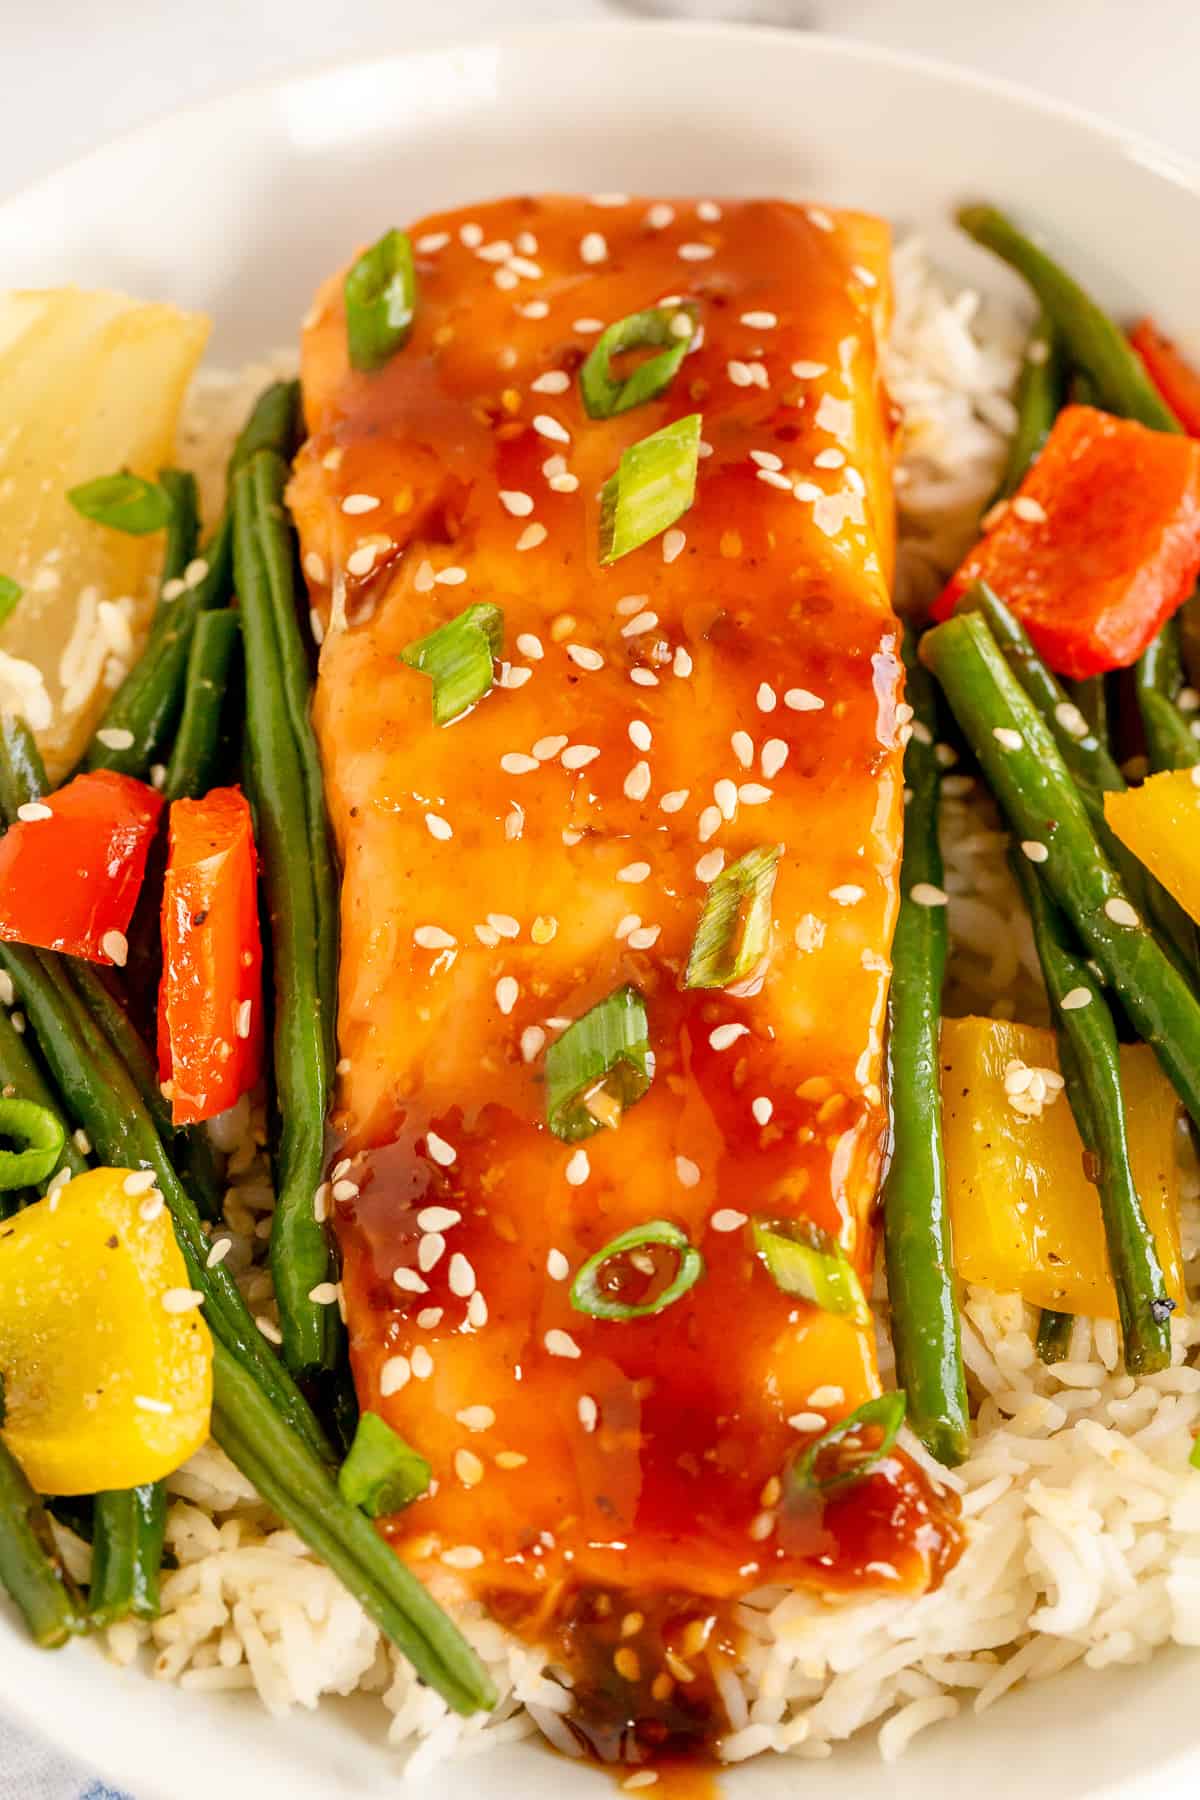 A close up of salmon teriyaki in a bowl with rice and veggies.